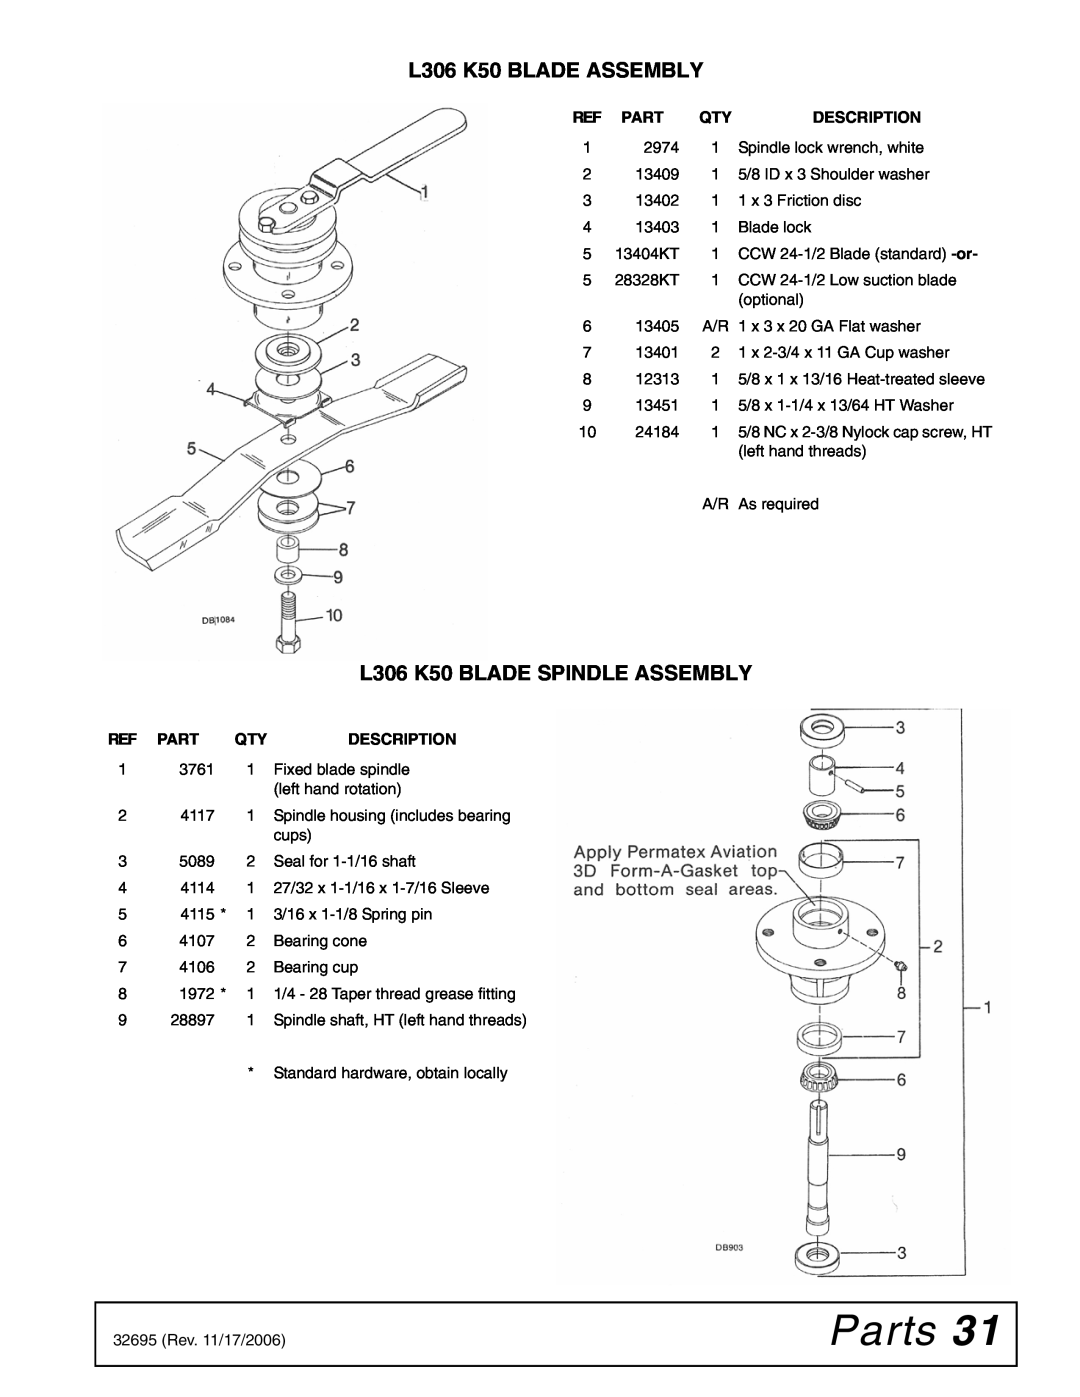 Woods Equipment manual L306 K50 BLADE ASSEMBLY, Parts, L306 K50 BLADE SPINDLE ASSEMBLY 